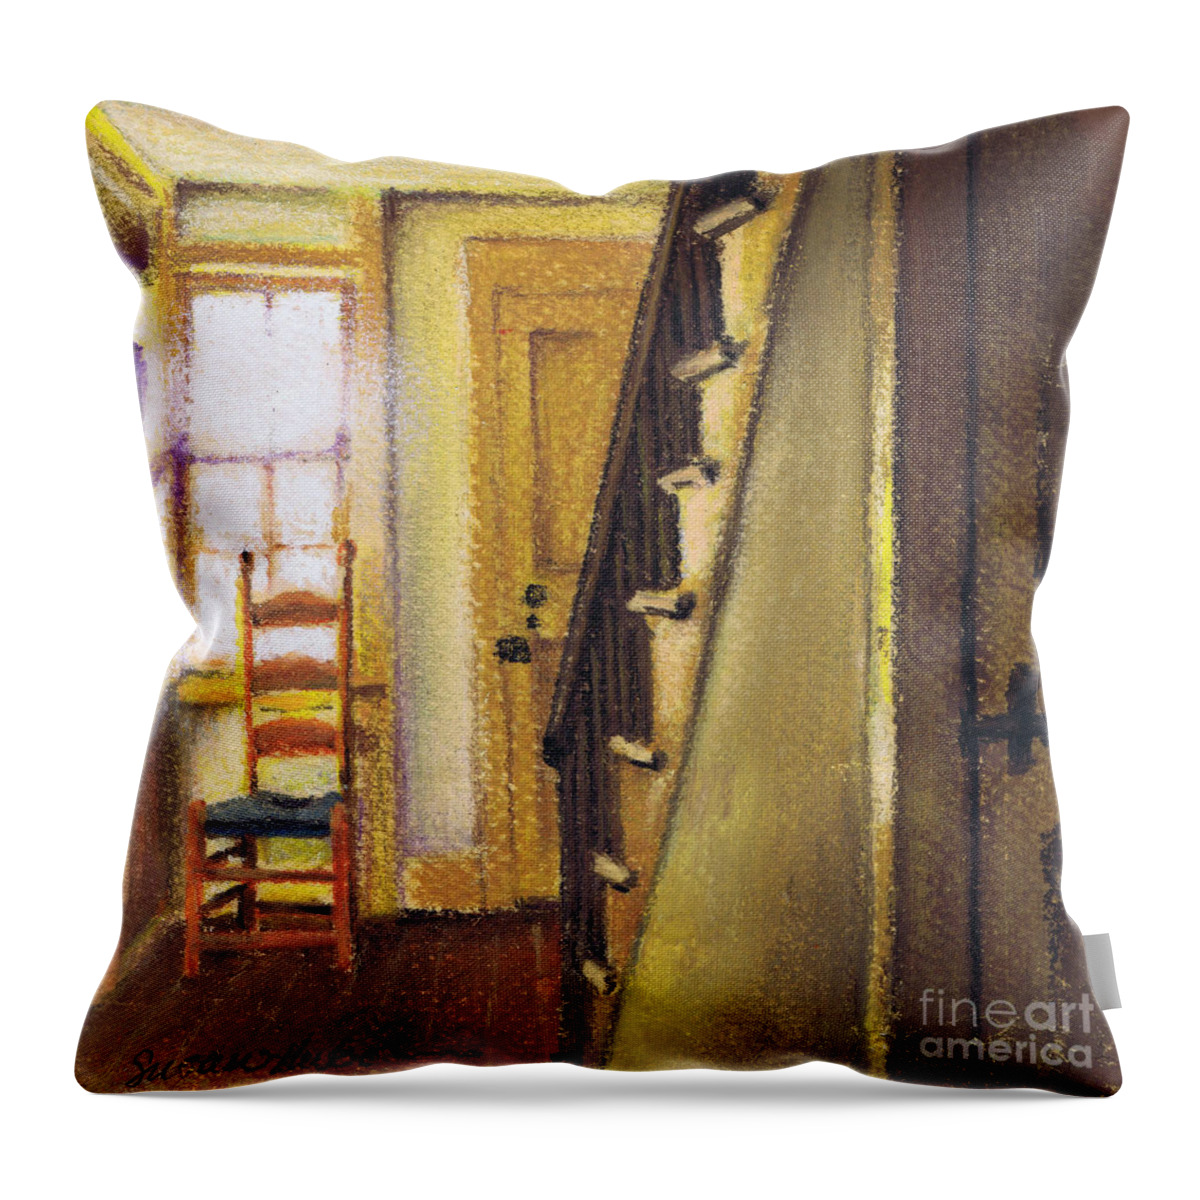 Yellow Throw Pillow featuring the painting Yellow Room by Susan Herbst